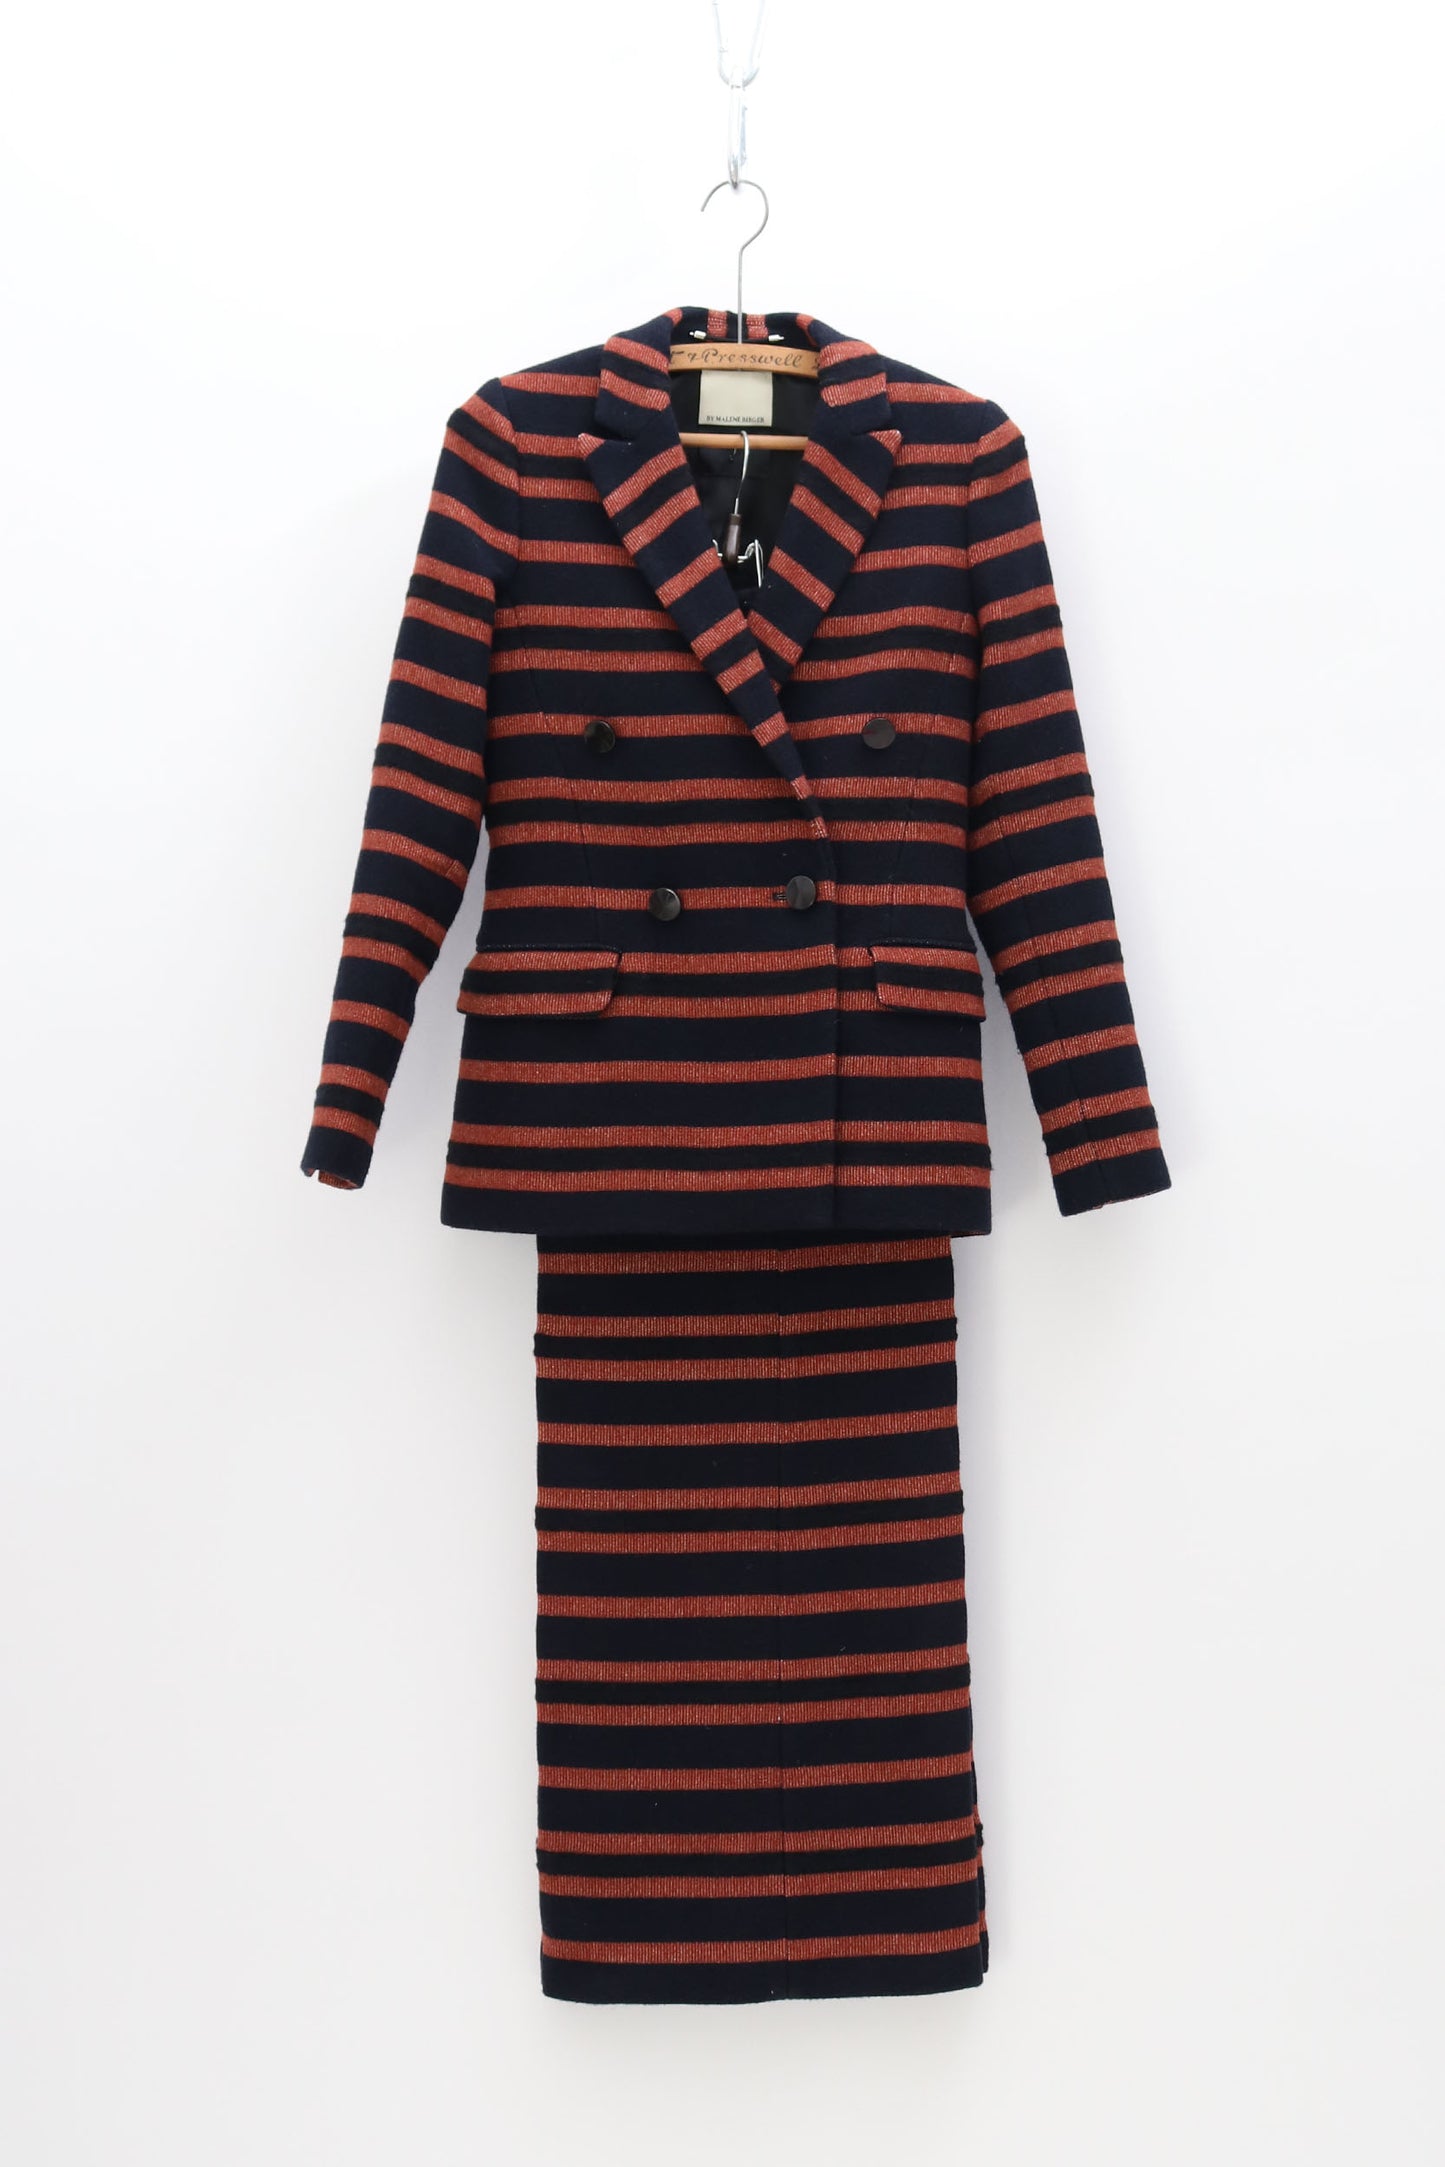 RENT: MALENE BIRGER WOOL MIX SUIT — from £41.25 per week